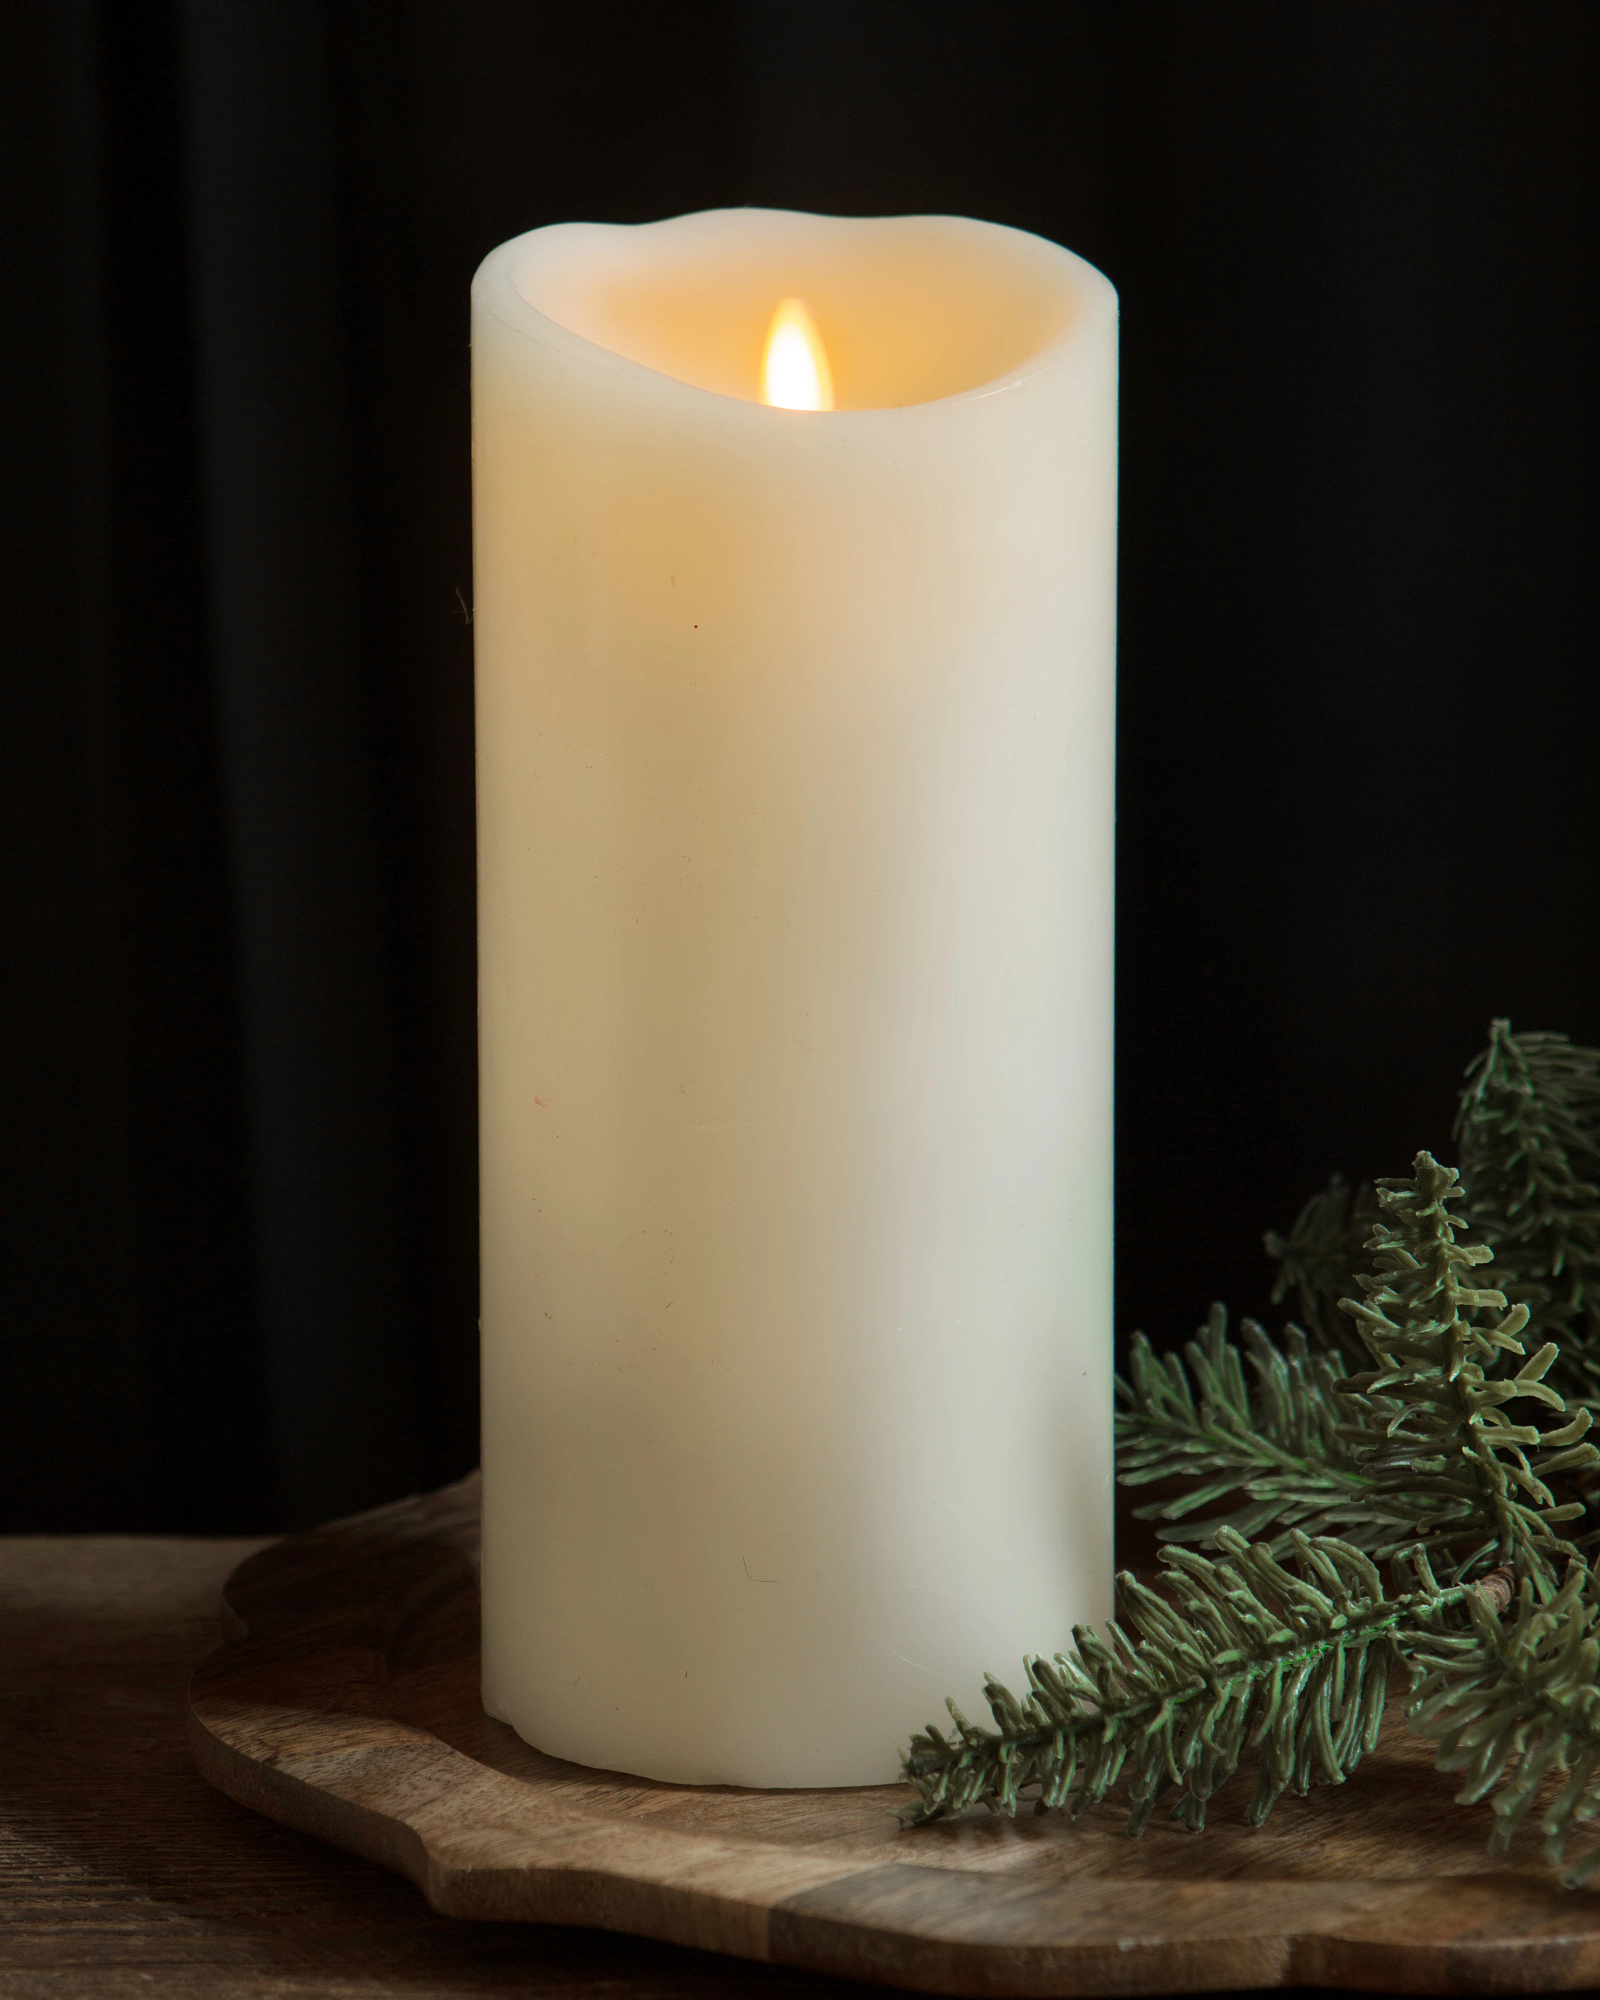 https://source.widen.net/content/k07scggf8a/jpeg/CDL-1741006_9in-Miracle-Flame-LED-Wax-Pillar-Candle_SSC-30.jpeg?w=1600&h=2000&keep=c&crop=yes&color=cccccc&quality=100&u=7mzq6p